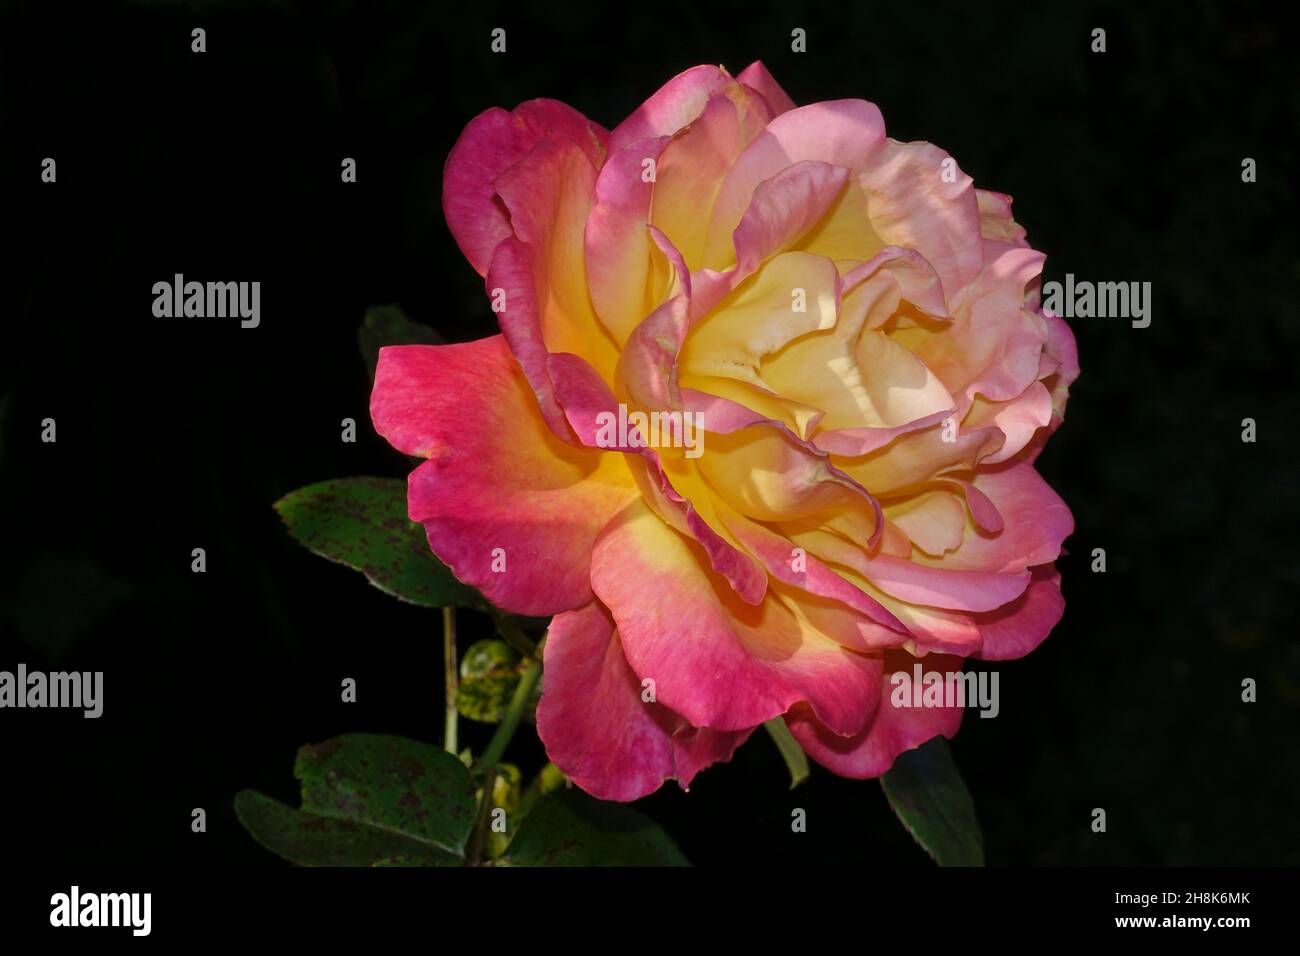 Close-up of a rose flower on a dark background Stock Photo